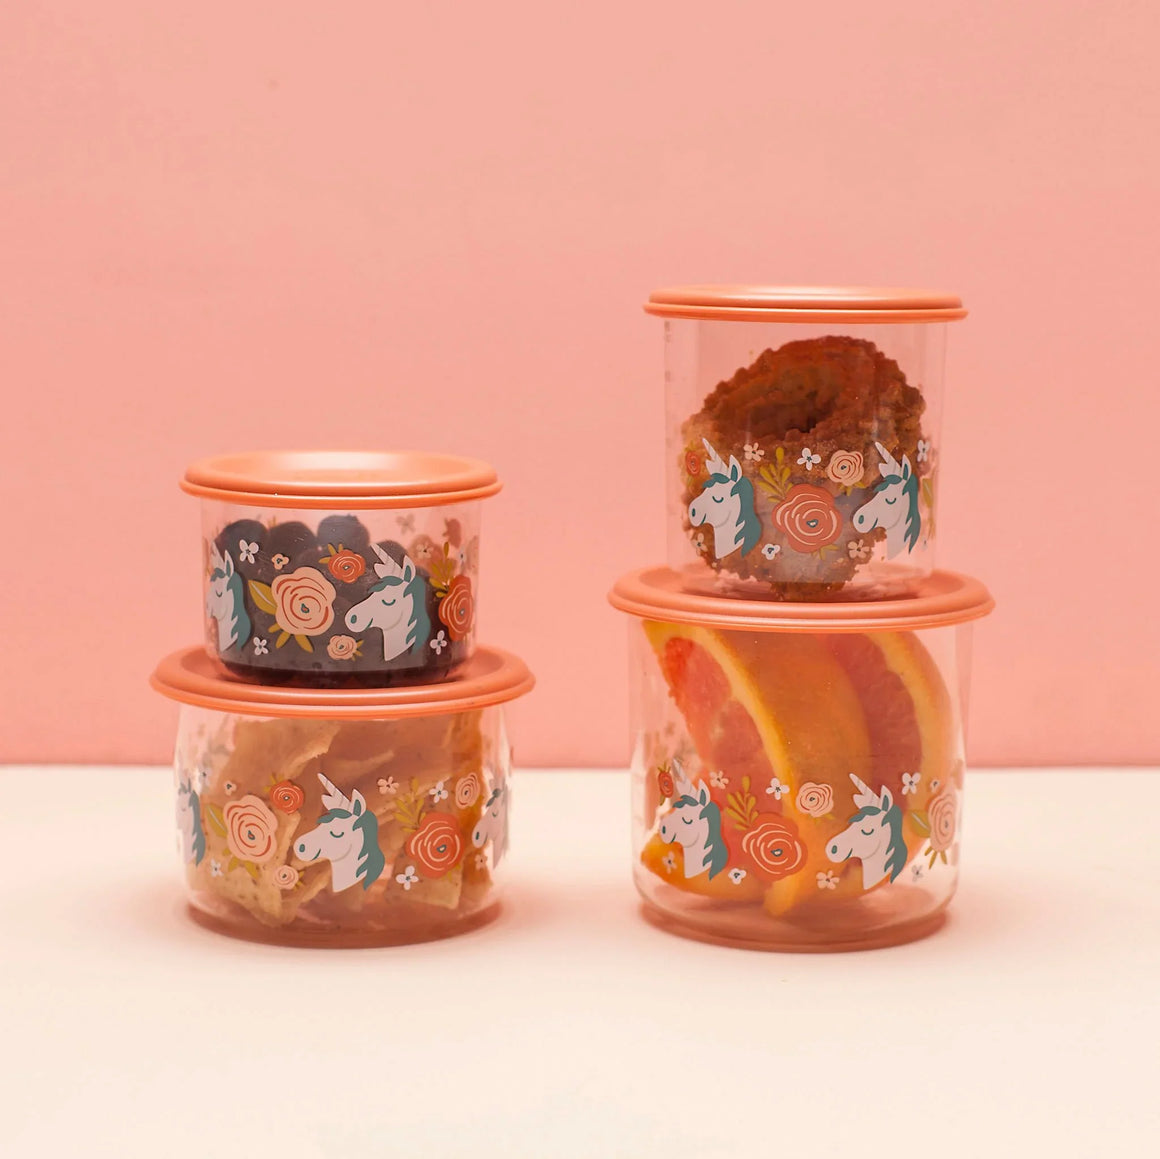 Unicorn - Good Lunch Containers - Large 2 pcs.